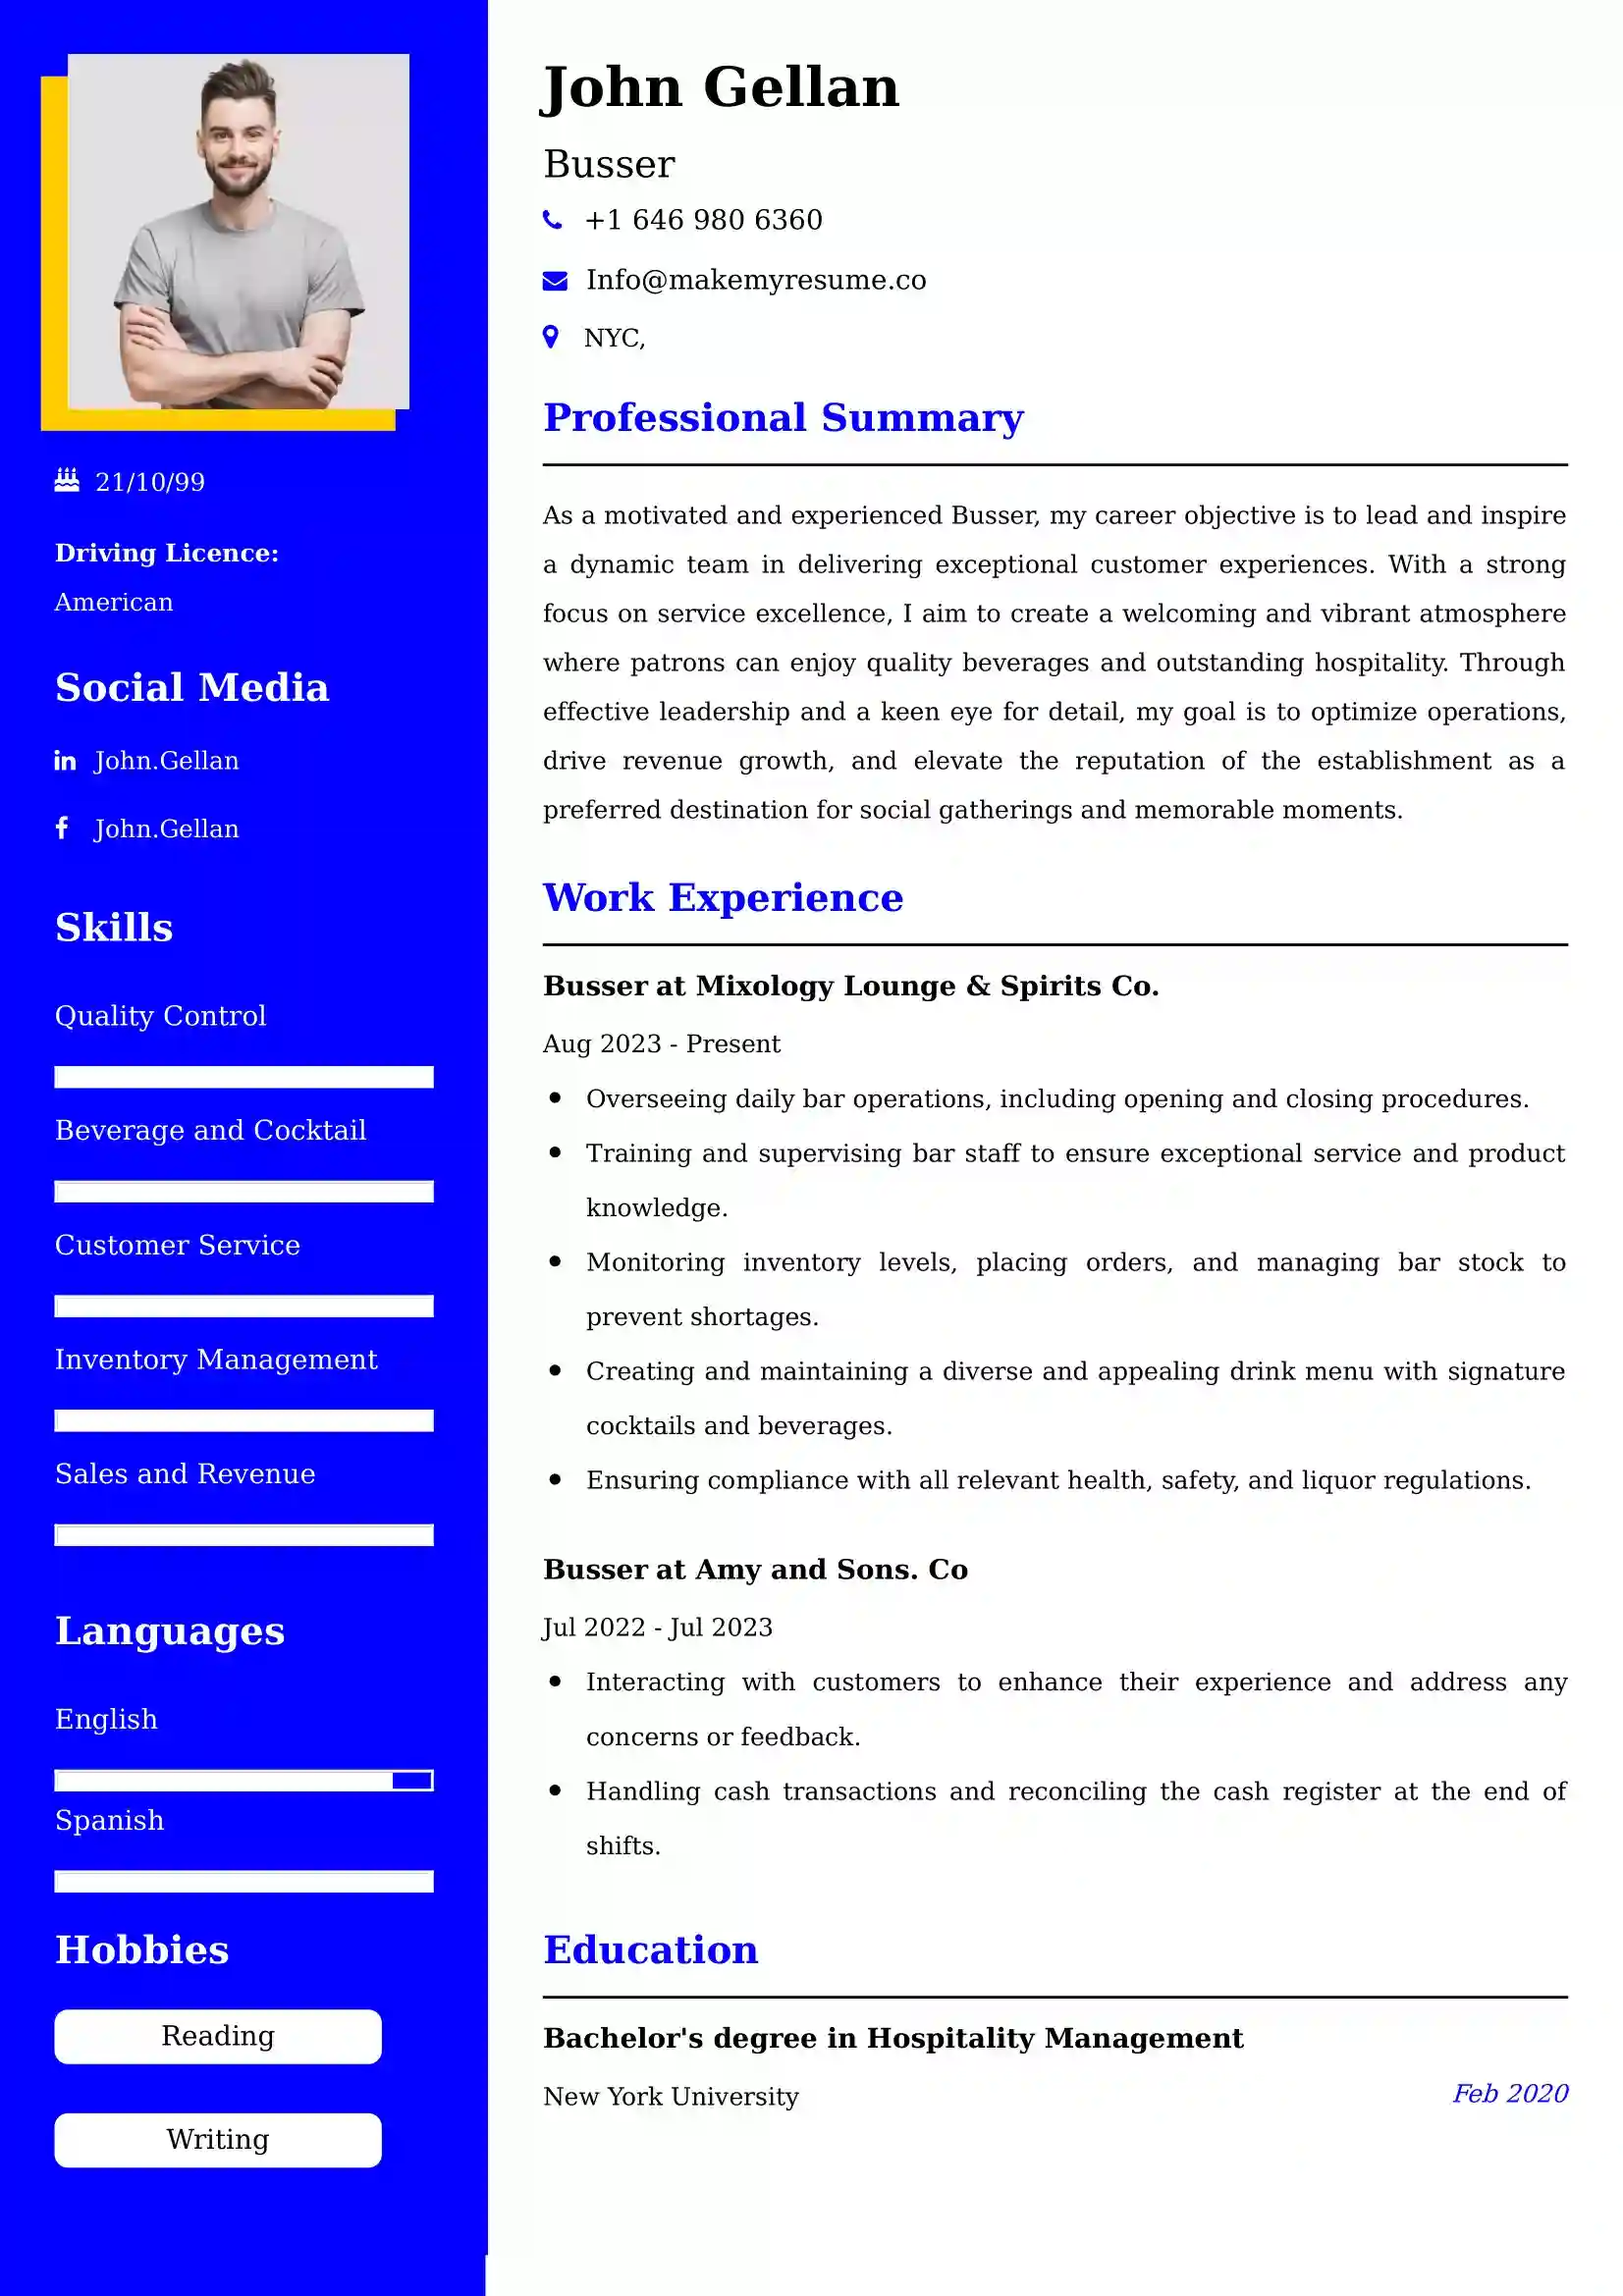 Busser Resume Examples - Brazilian Format, Latest Template